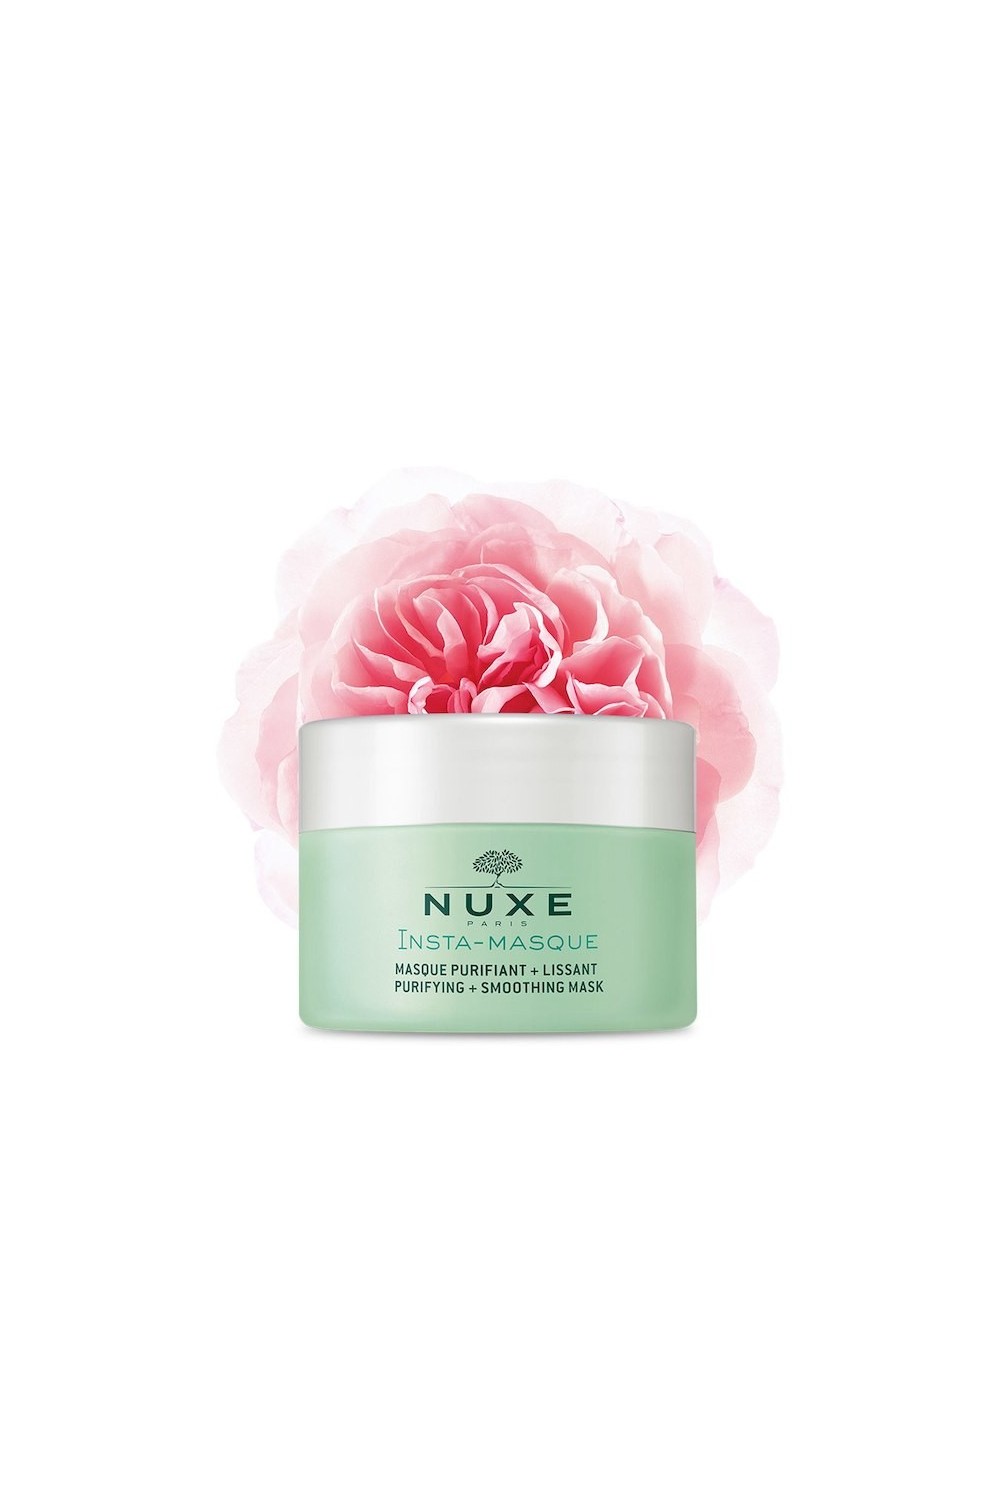 Nuxe Insta-Masque Purifying + Smoothing Mask Rose And Clay 50ml